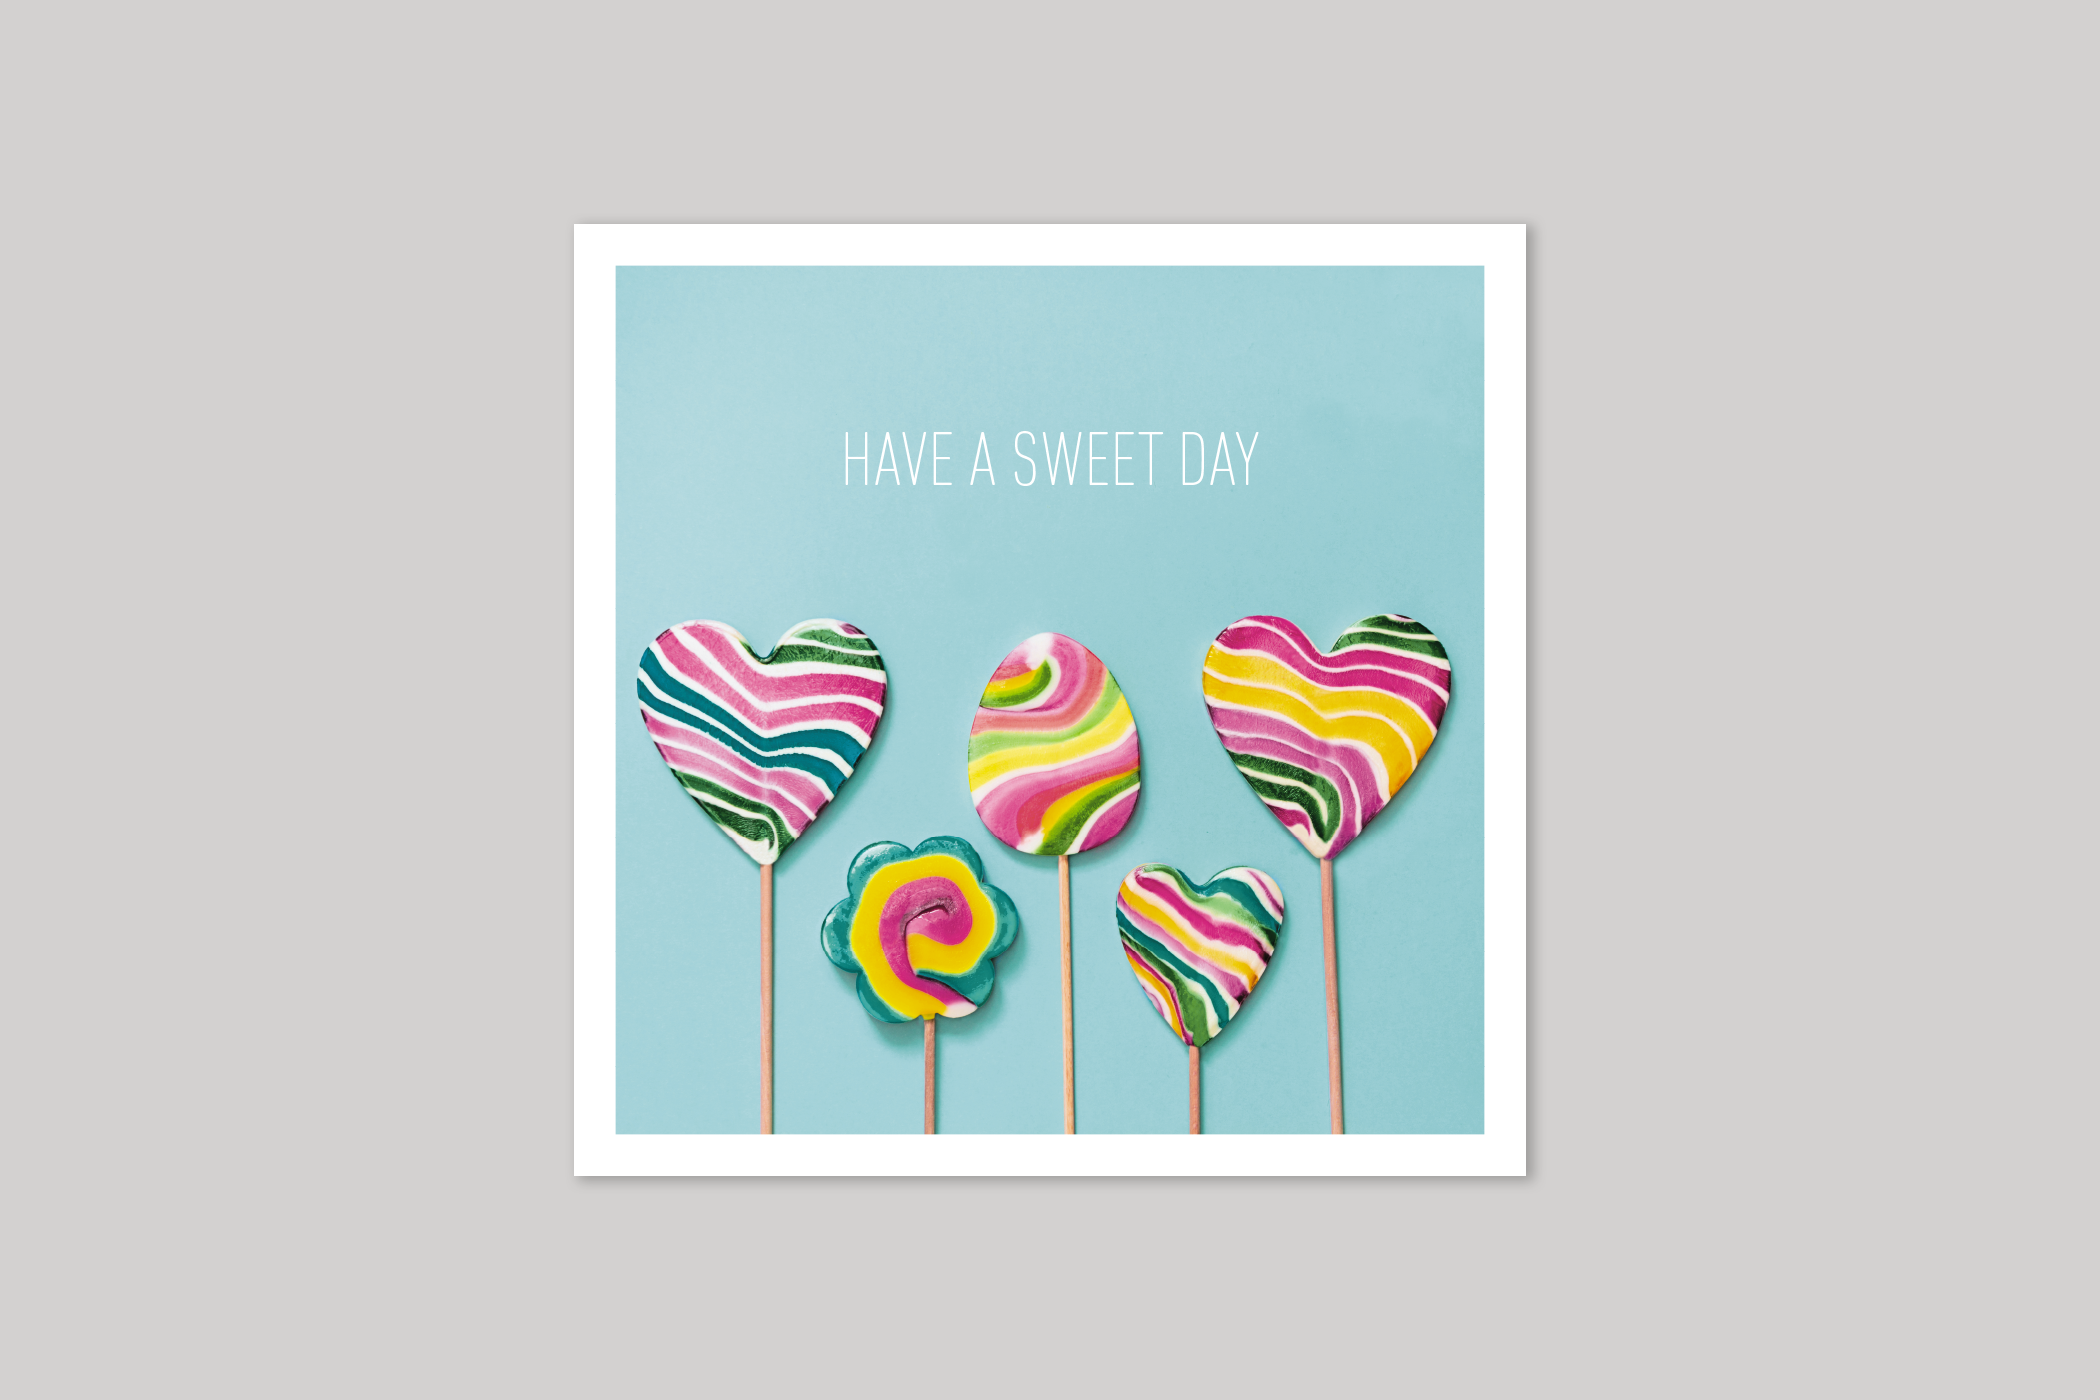 Have A Sweet Day from Beautiful Days range of contemporary photographic cards by Icon.